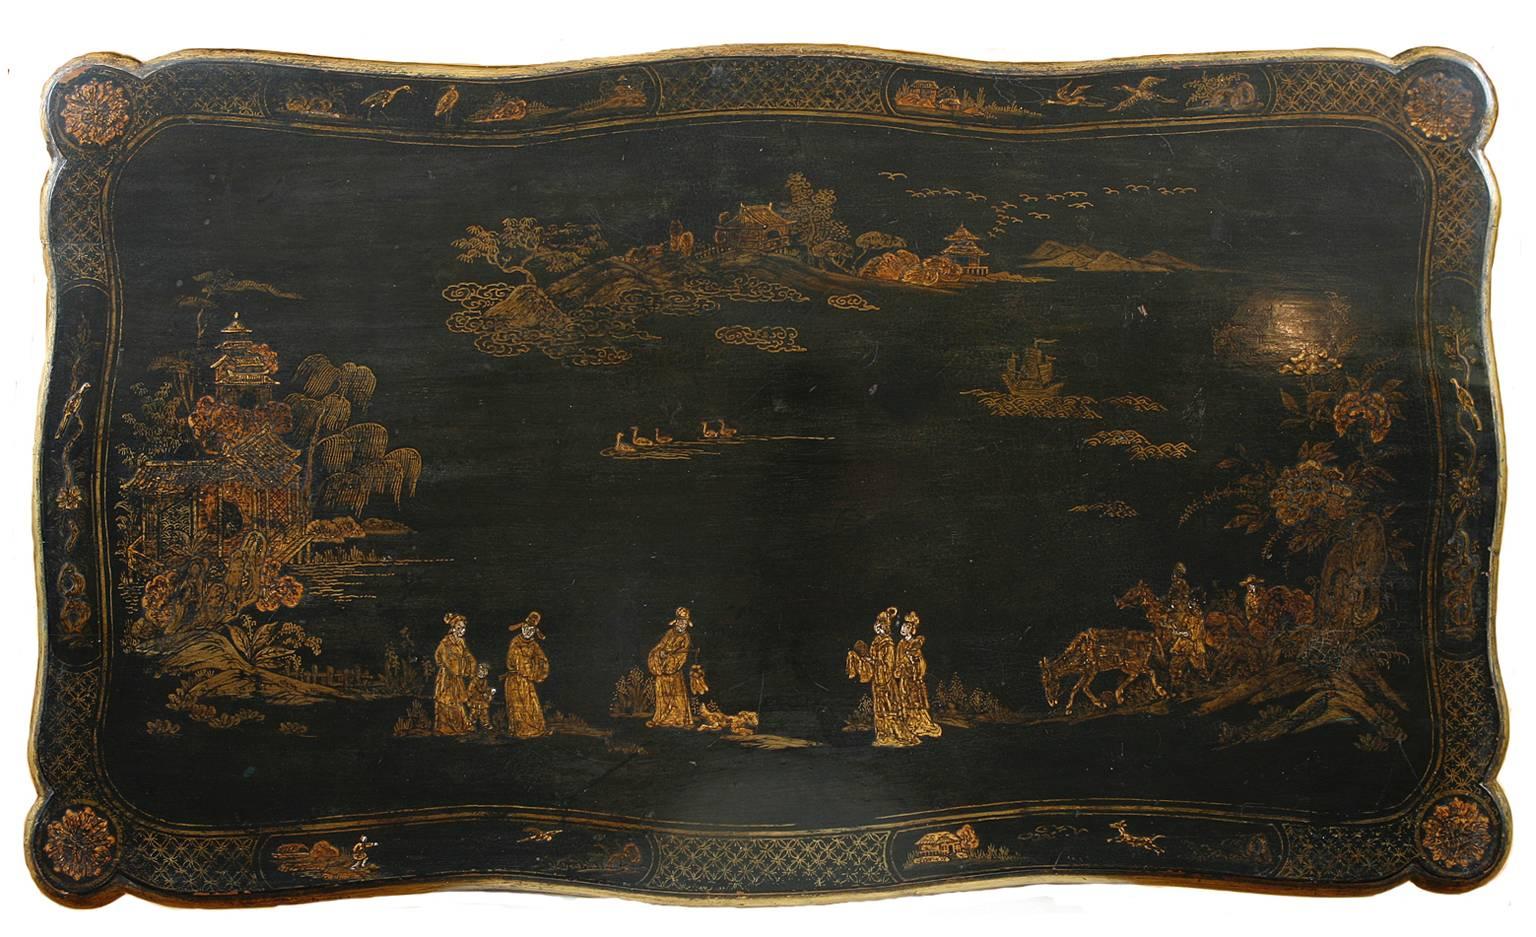 A very lovely chinoiserie table in black lacquer with decorations in gold paint of scenes from Chinese village life that include: Men astride horses holding nets with dogs afoot, women strolling along a path with pagodas and houses in the distance